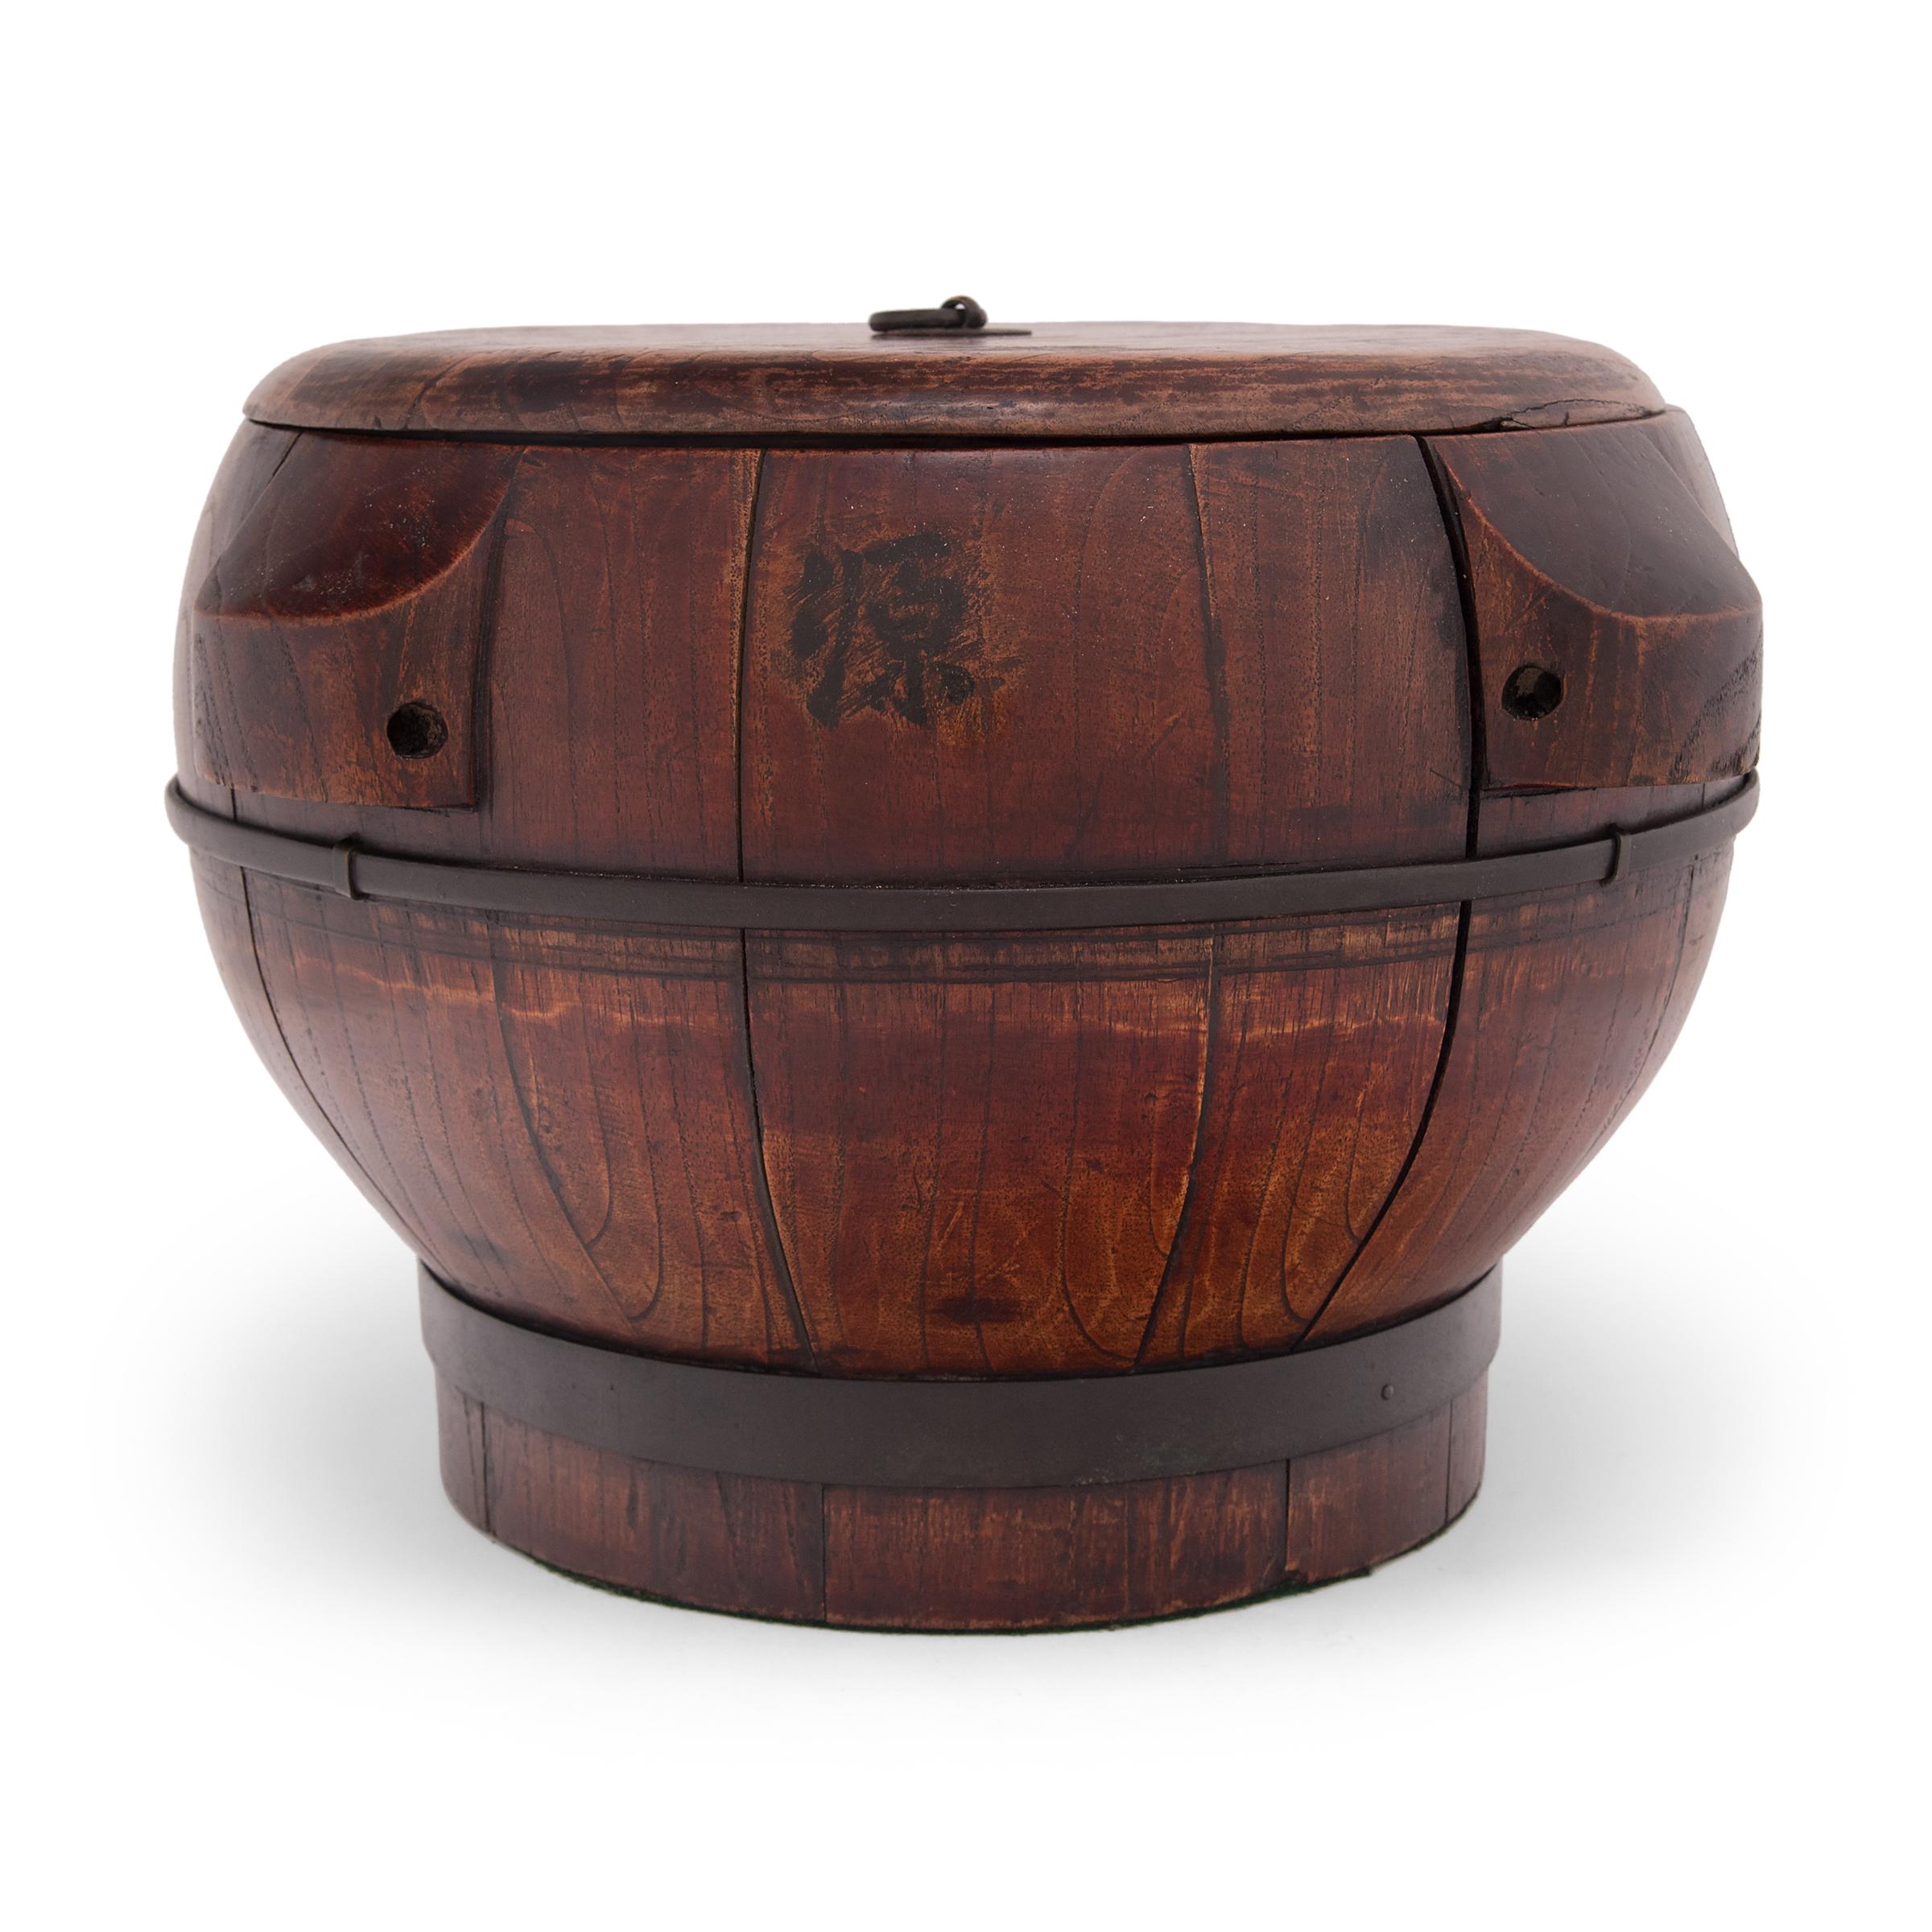 This hand-crafted wood container dates to the early 20th century and was used to store rice and other grains. The lidded container has a rounded body with a short footed base, constructed of elmwood staves bound with iron rings. Intended for